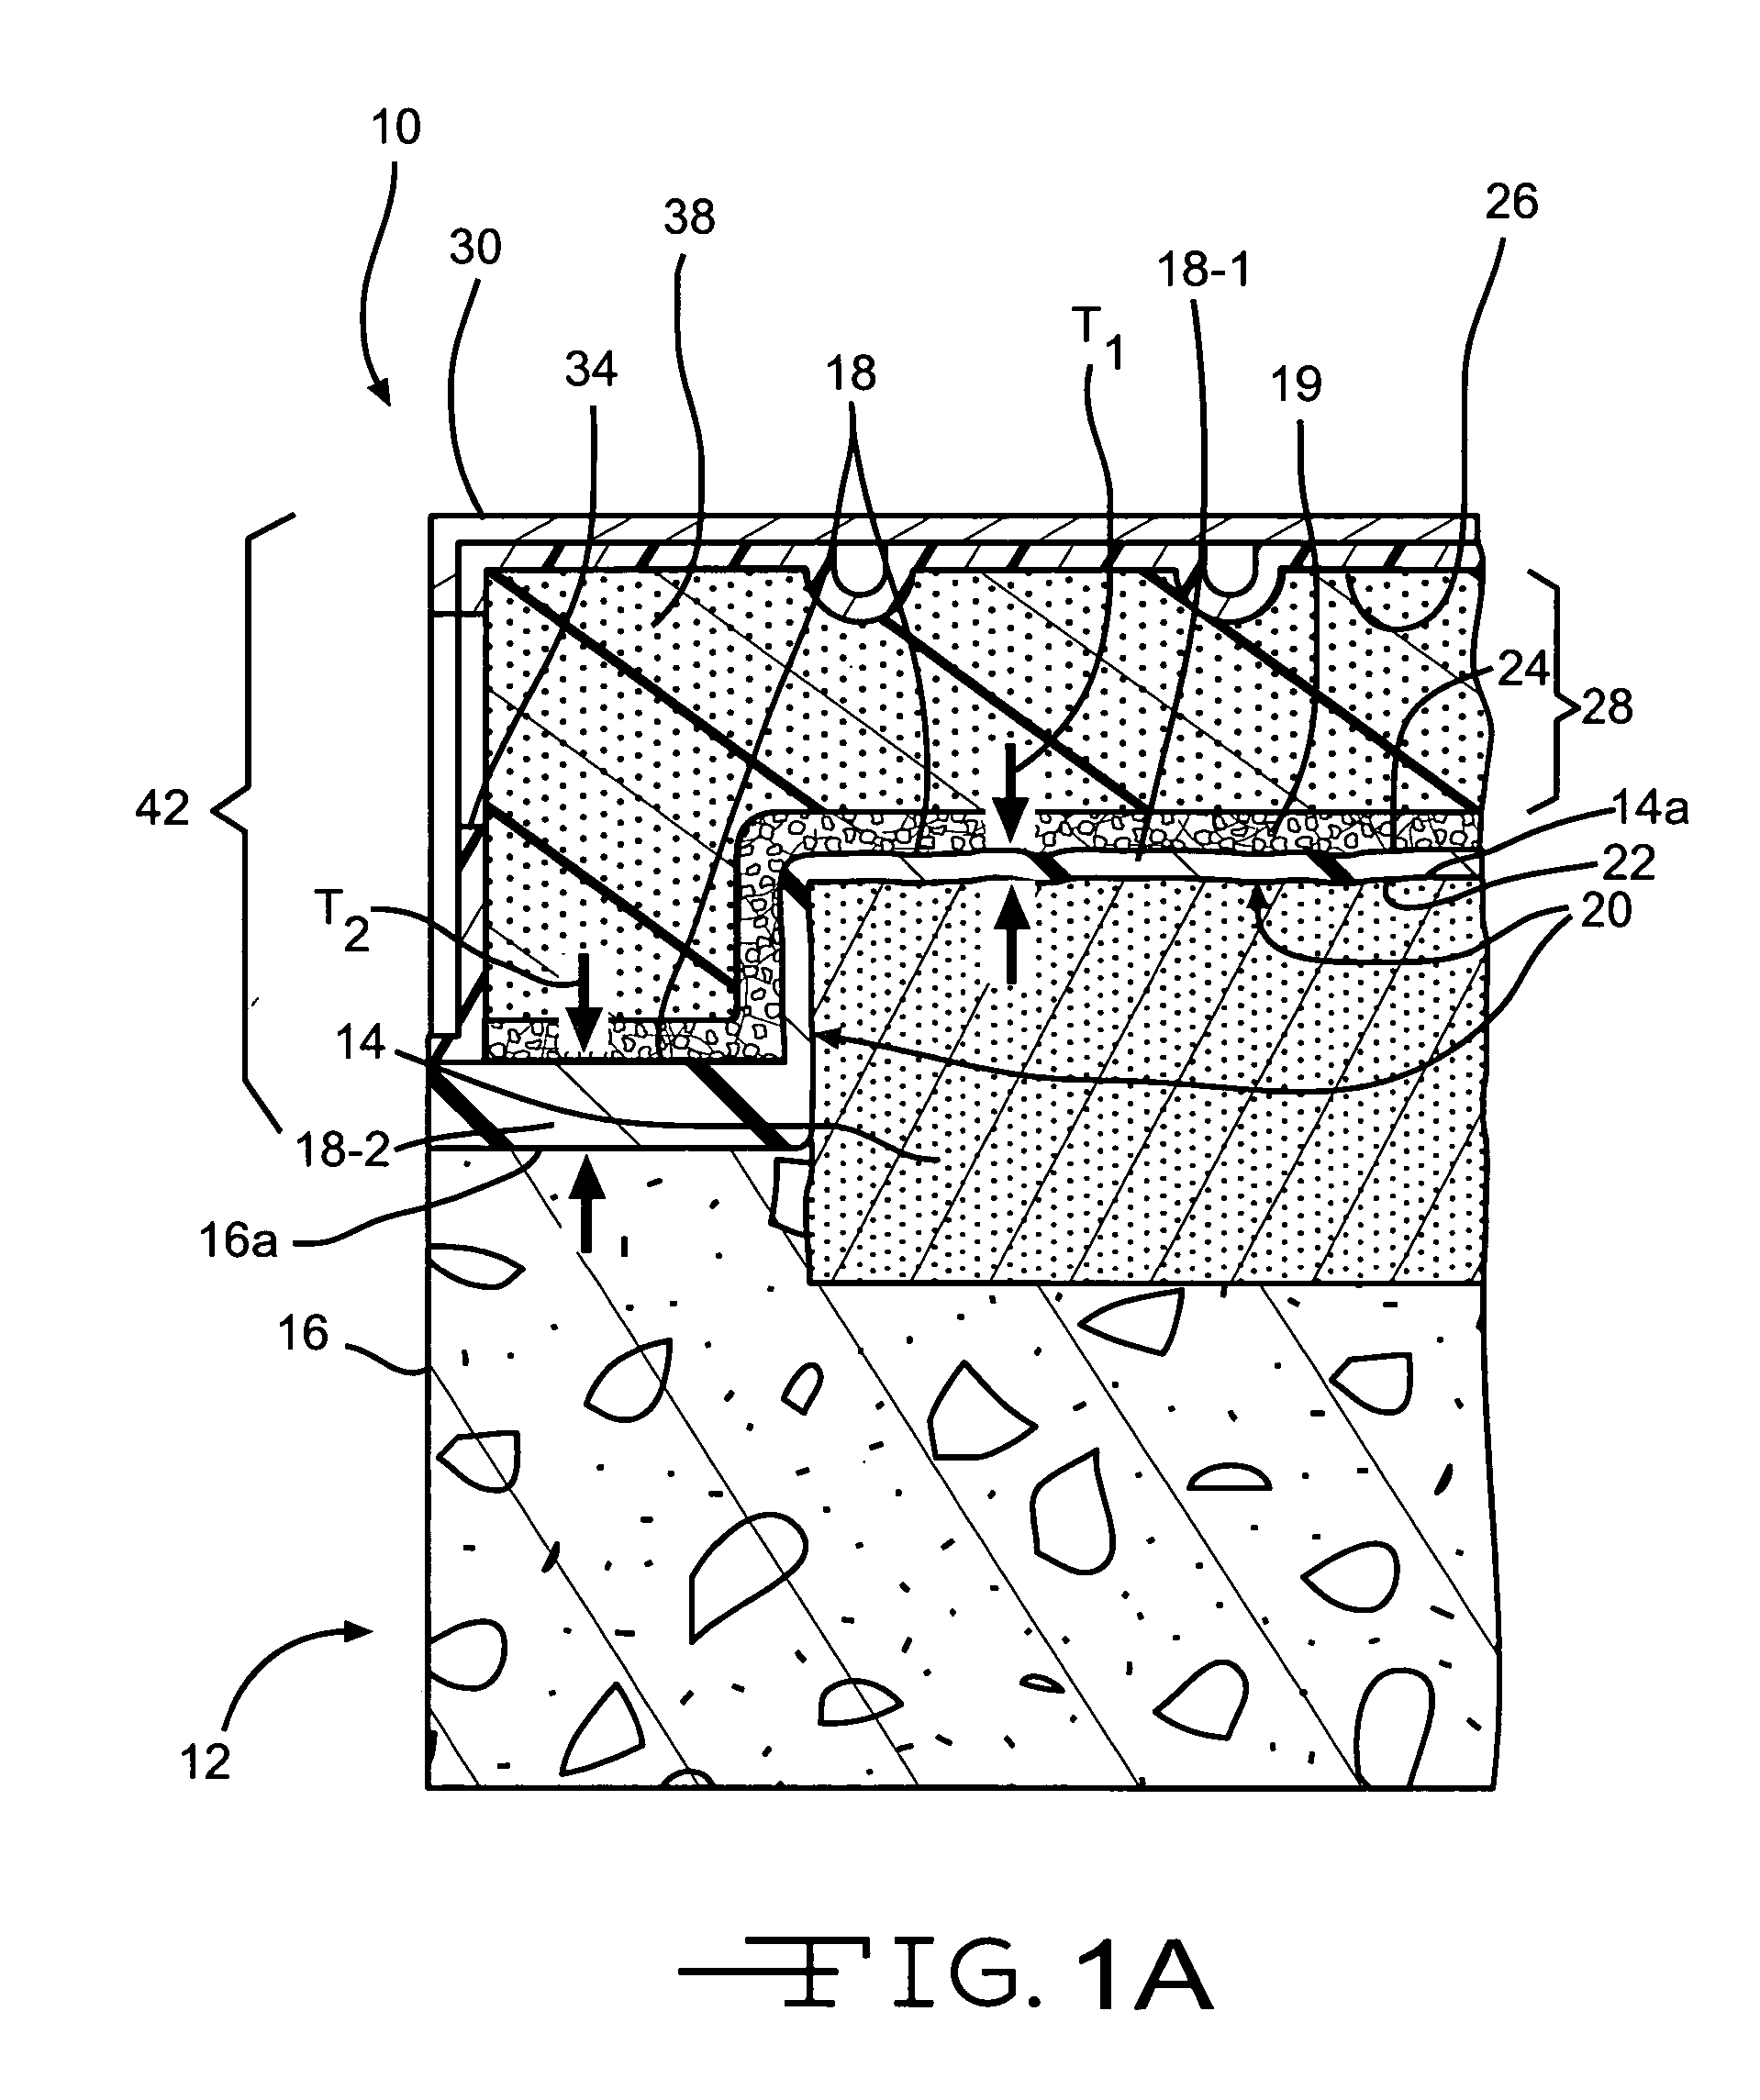 Mold and method for manufacturing a simulated stone product